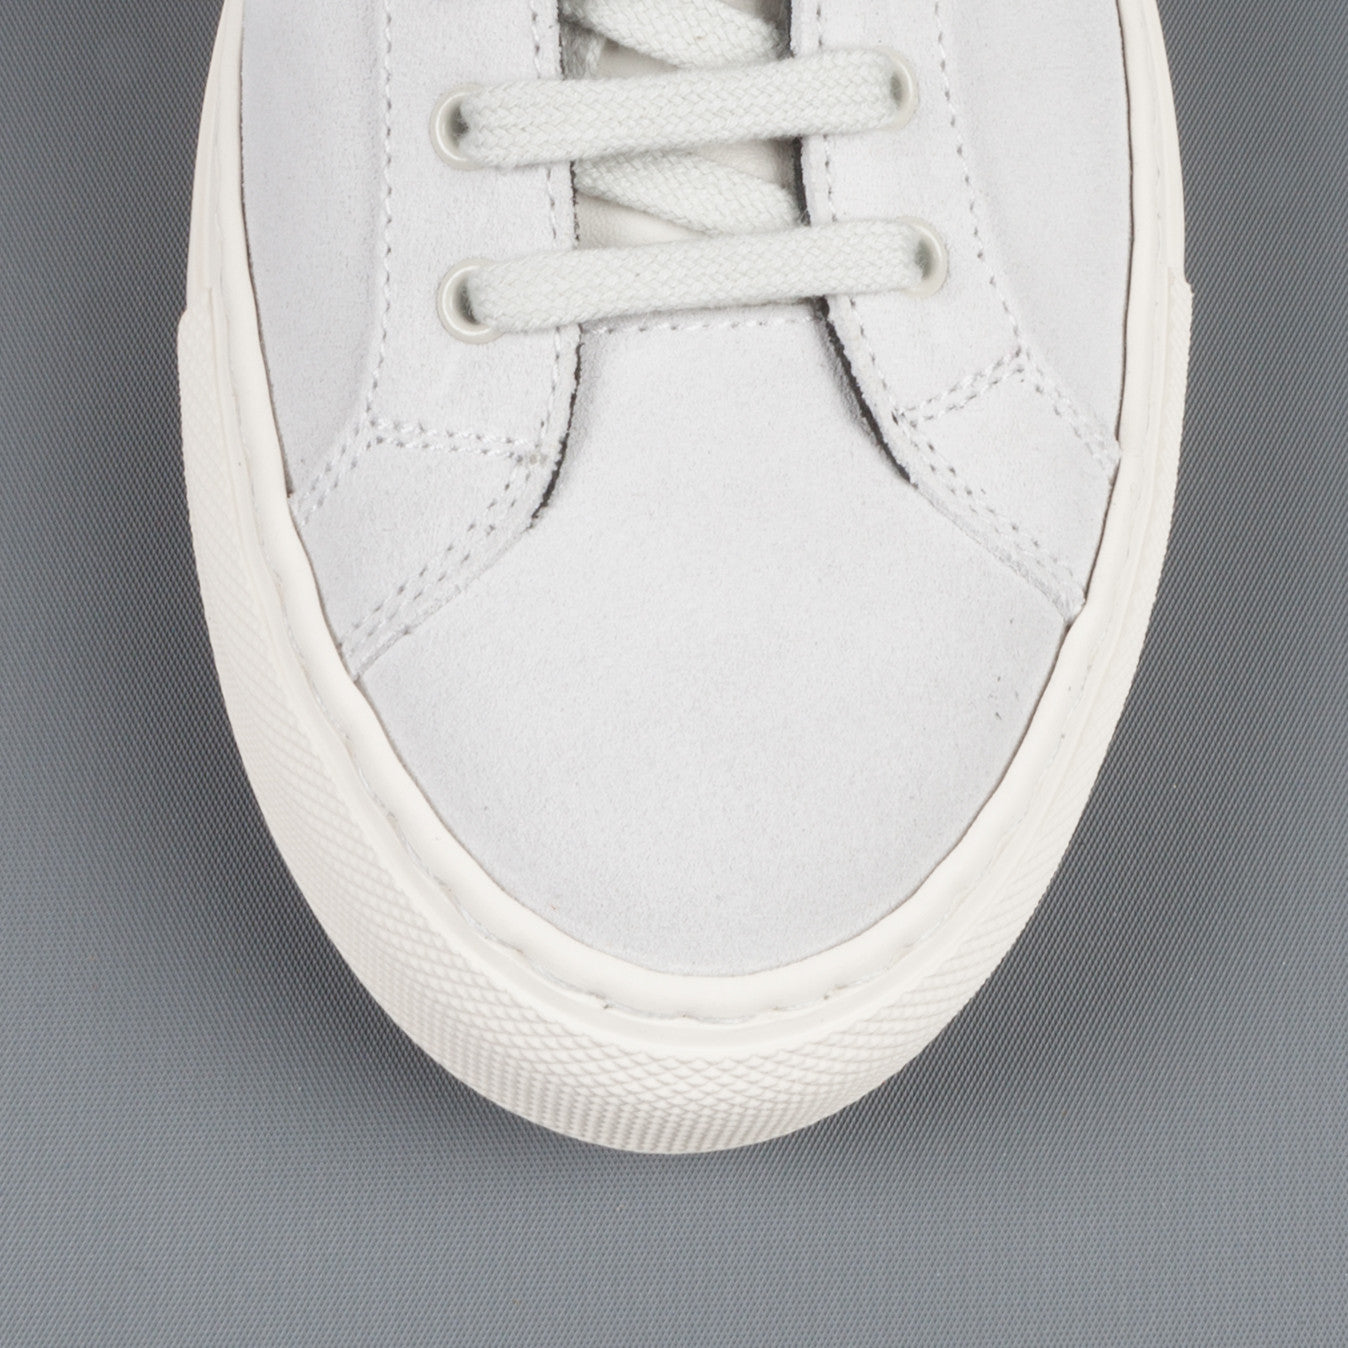 Common Projects Woman by Common Projects Achilles retro low suede white